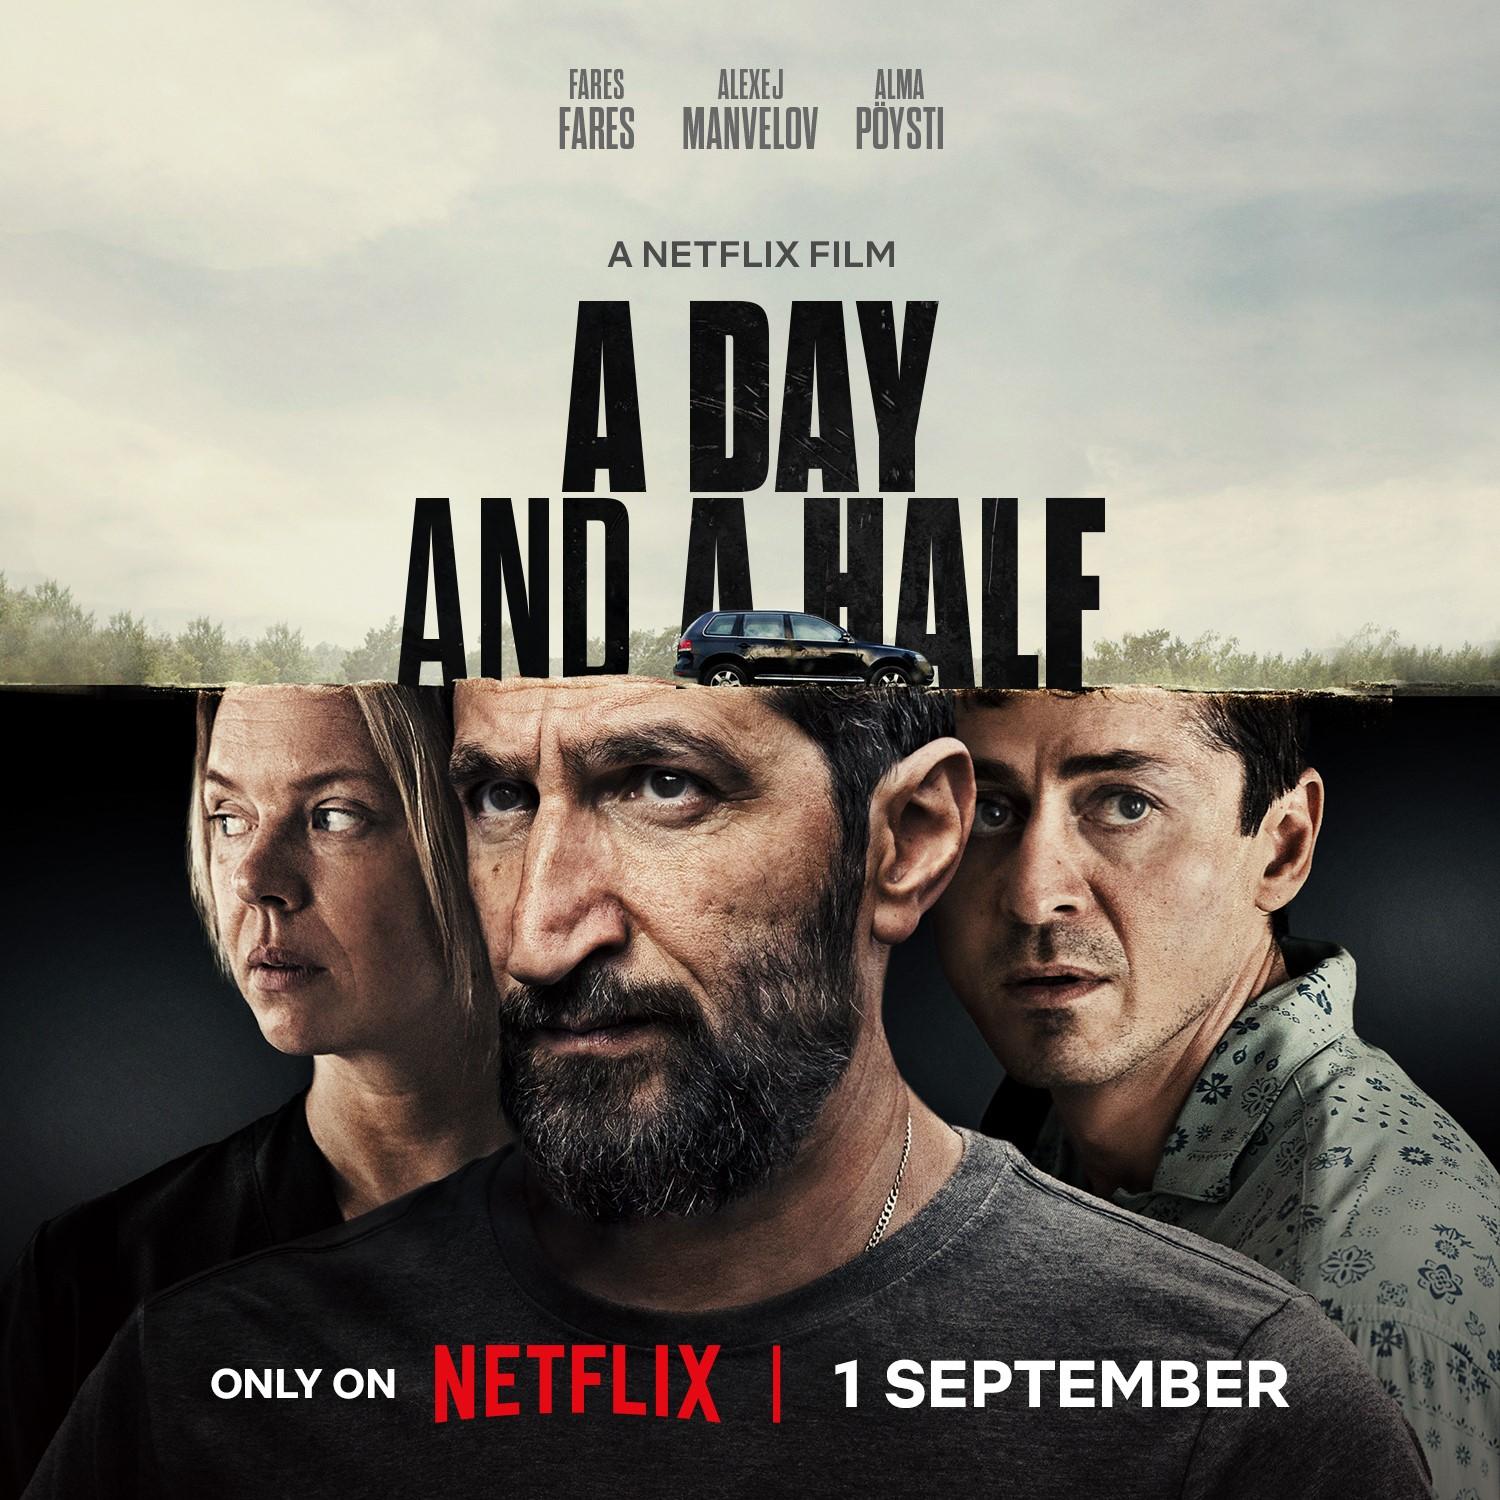 A Day and a Half (Netflix, September 1): Delve into a suspenseful journey as Artan's desperate mission unfolds. Bursting into the medical center where his ex-wife Louise works, he takes her hostage, seeking answers about their daughter.